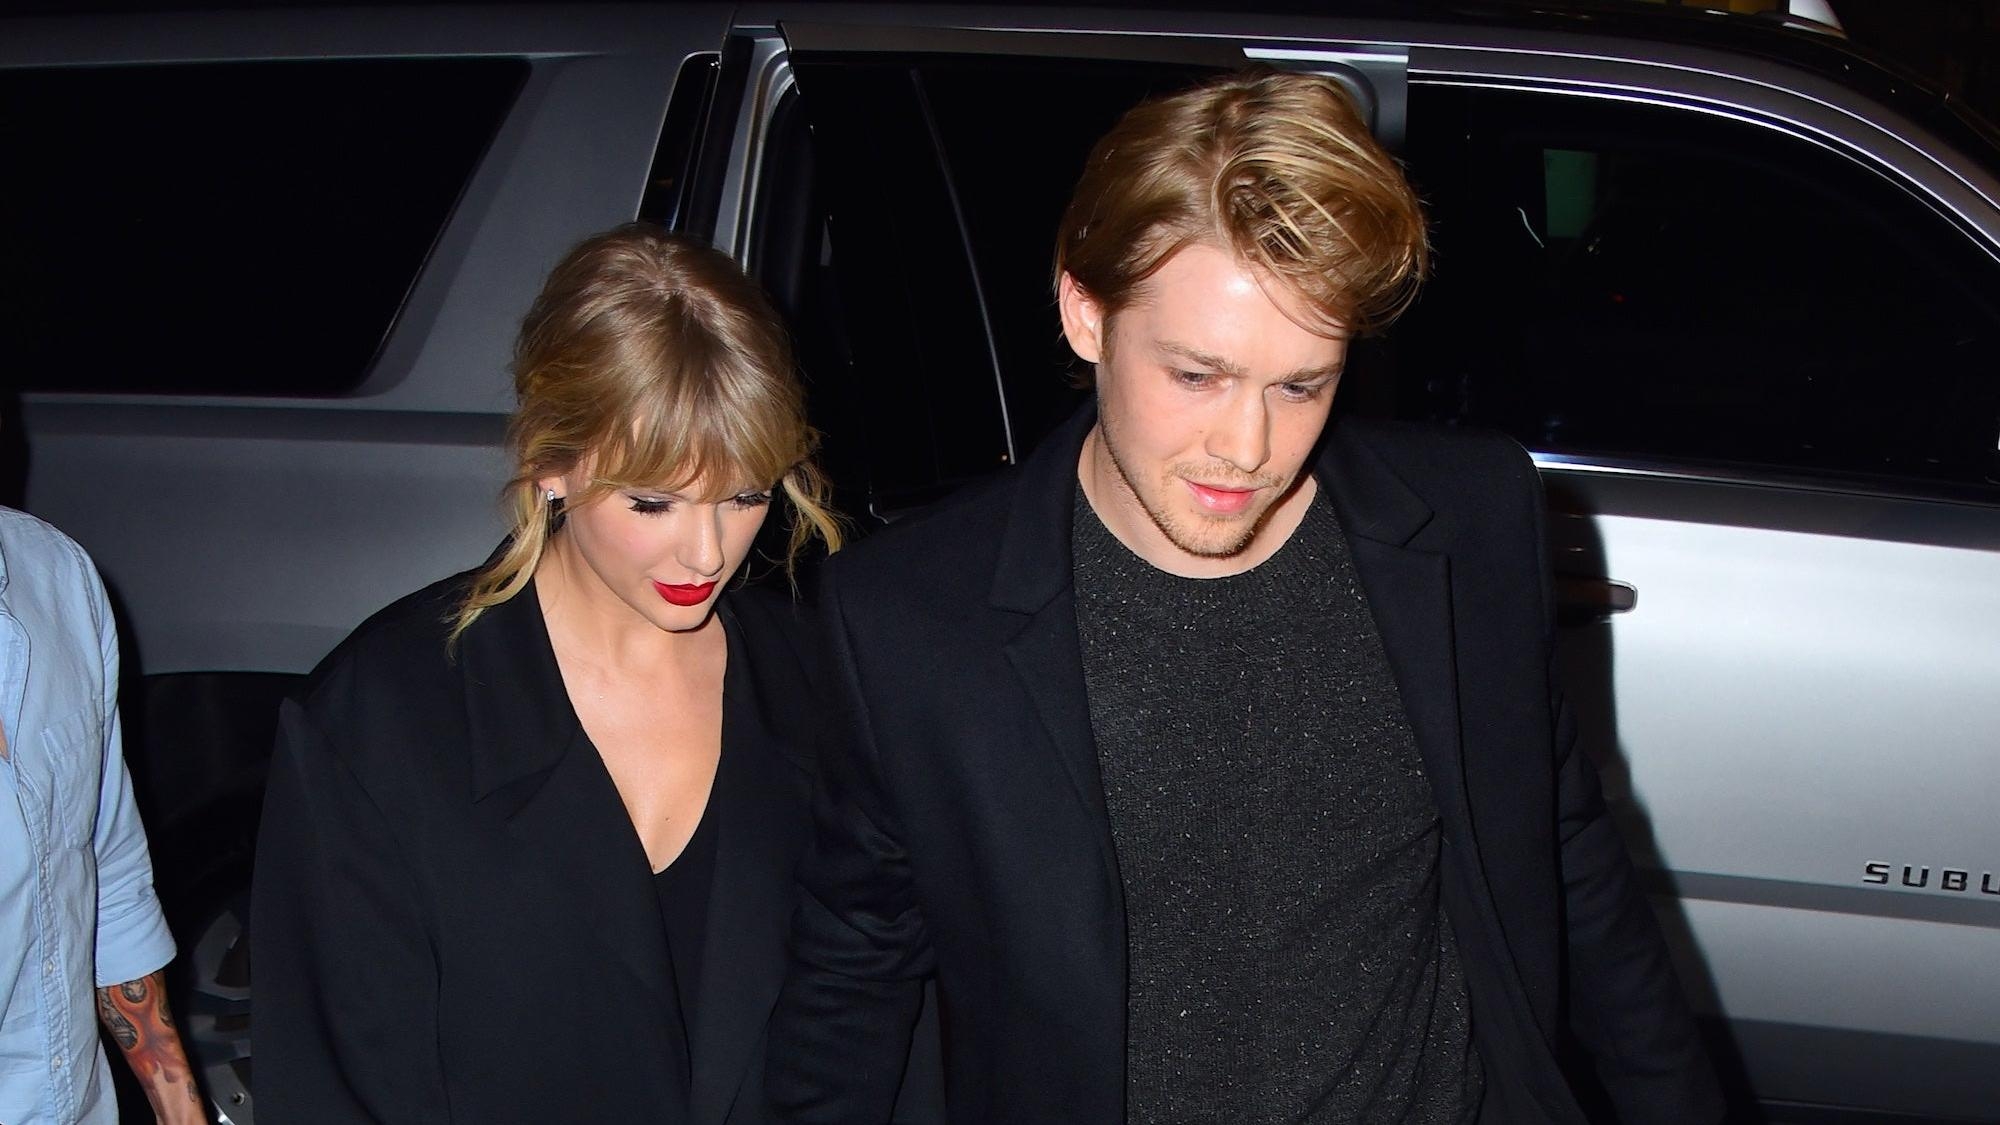 Joe Alwyn opens up about the existential bizarreness of being Taylor Swift’s ex